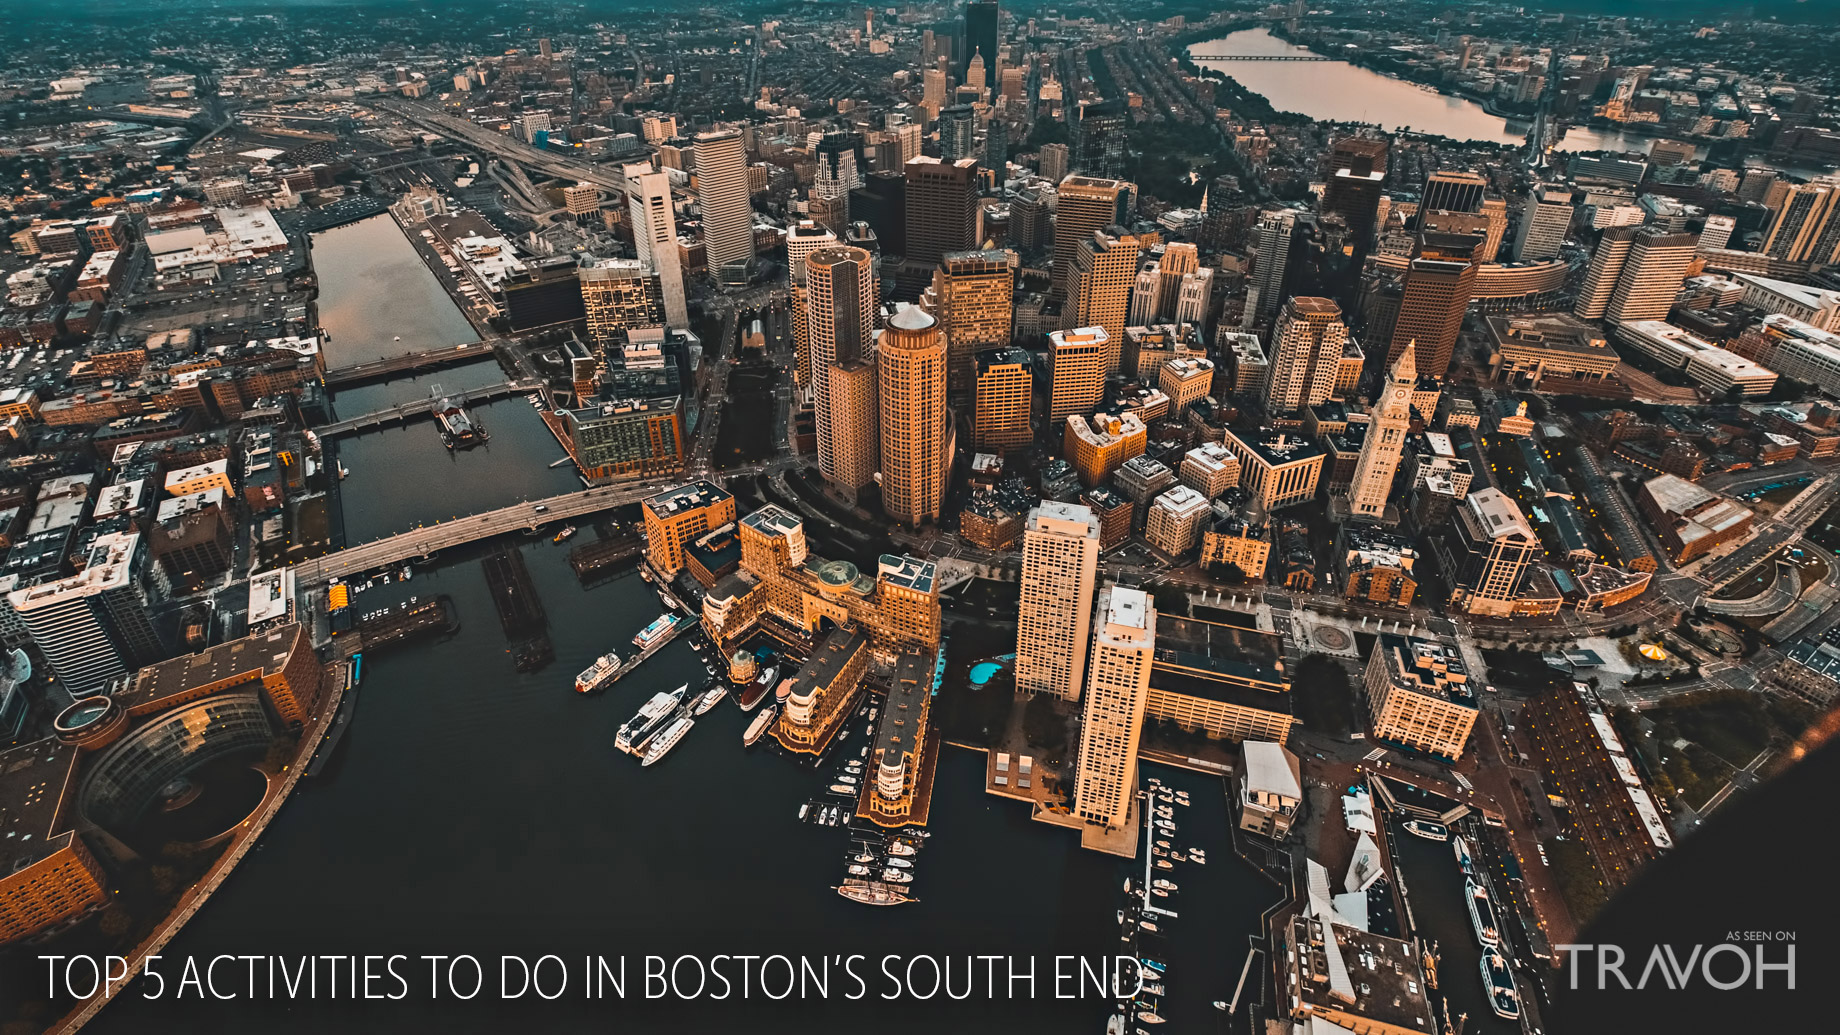 Travel Tips - Top 5 Activities To Do in Boston’s South End